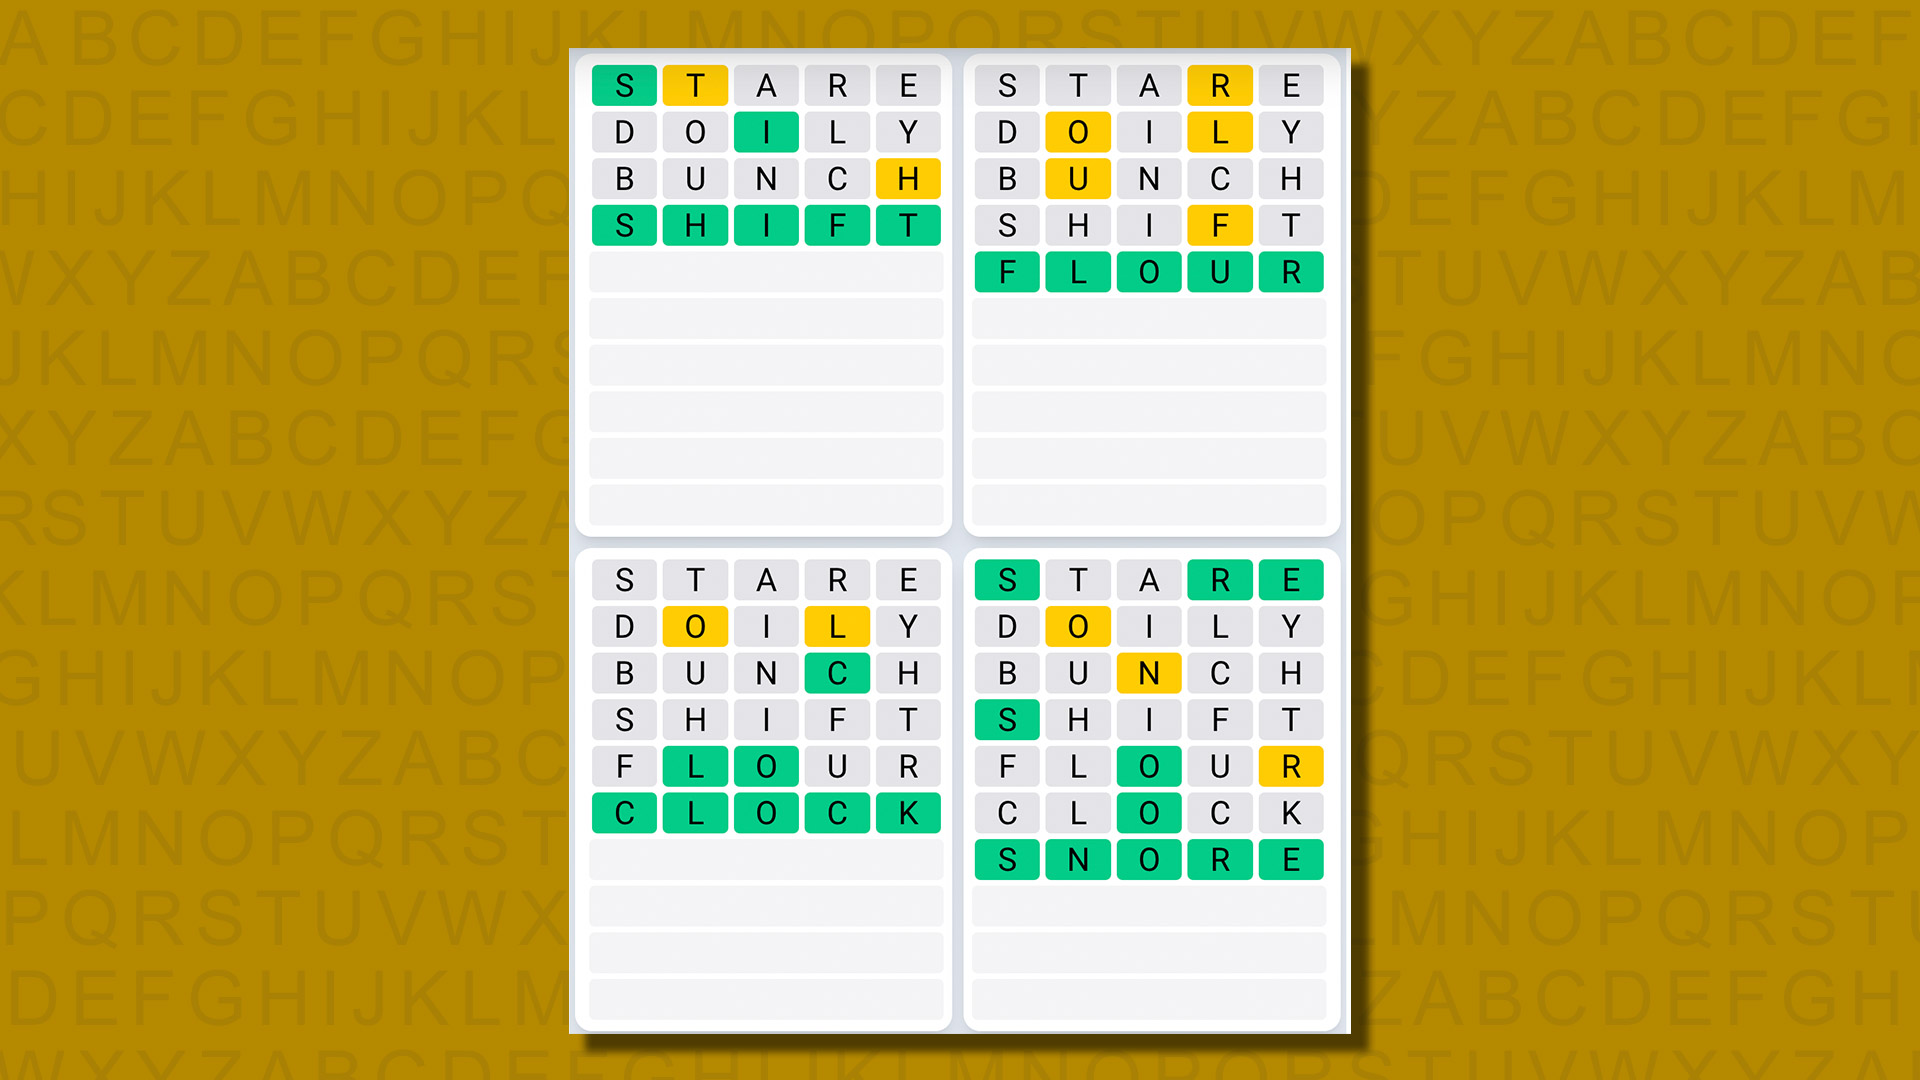 Quordle daily sequence answers for game 638 on a yellow background